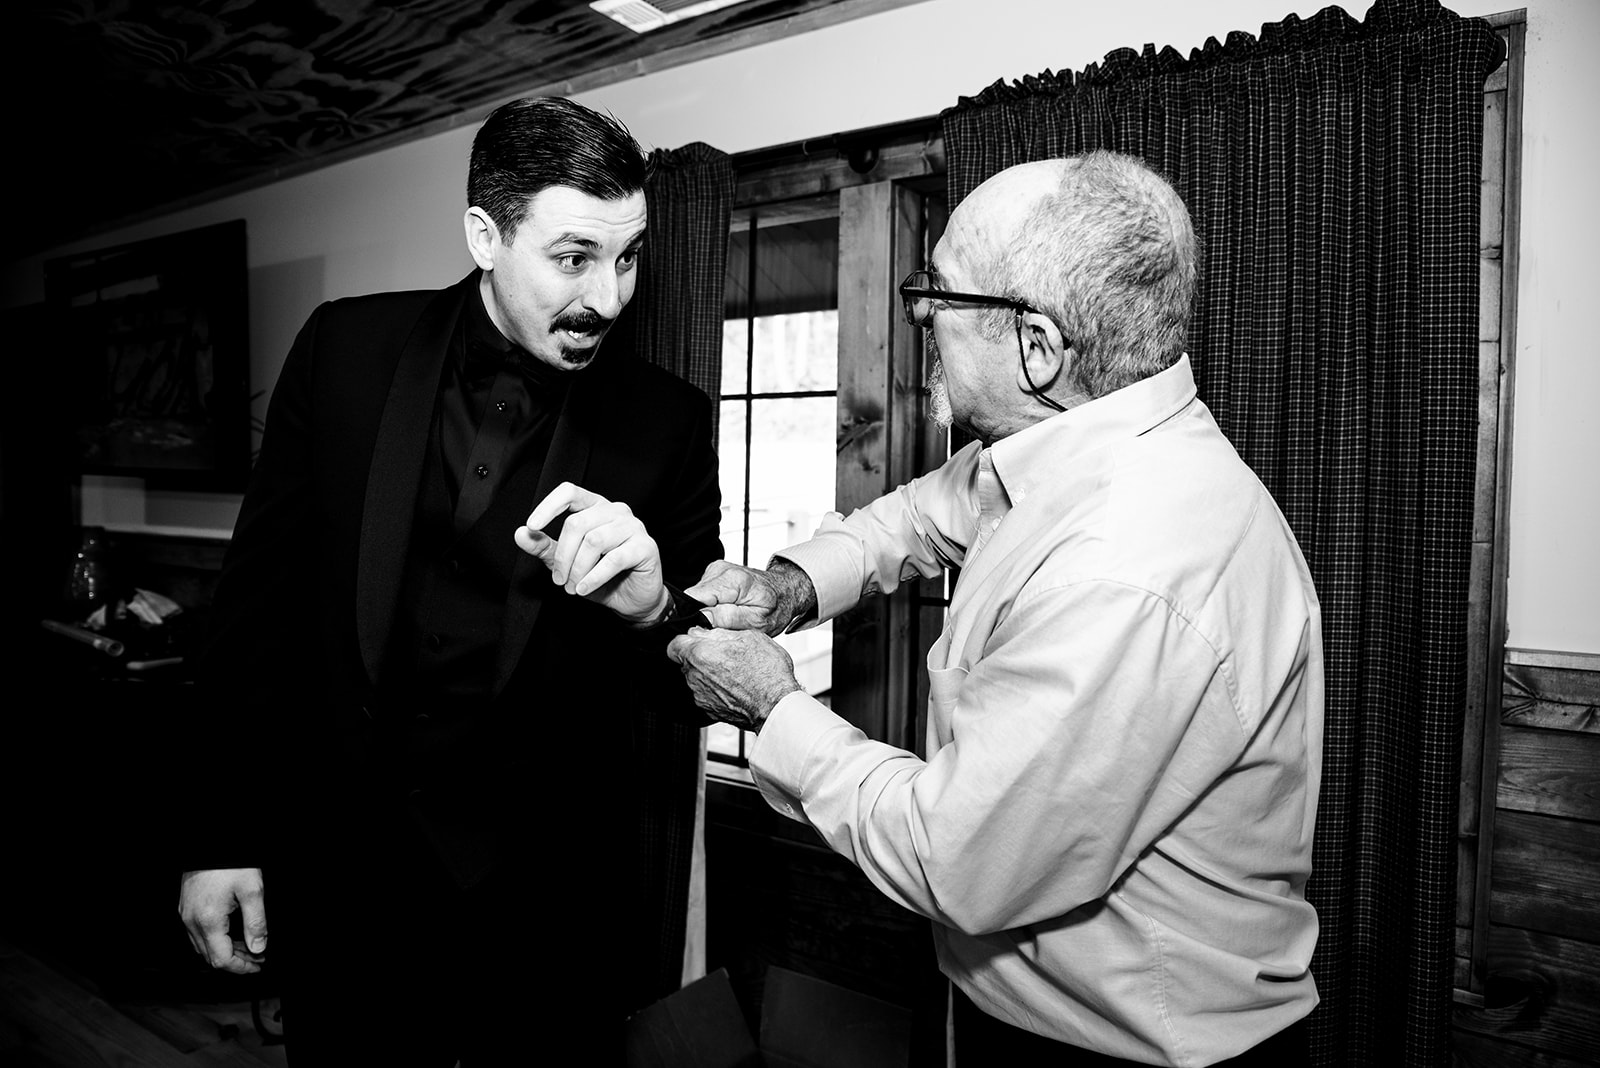 The uncle of the groom, putting cufflinks on the groom